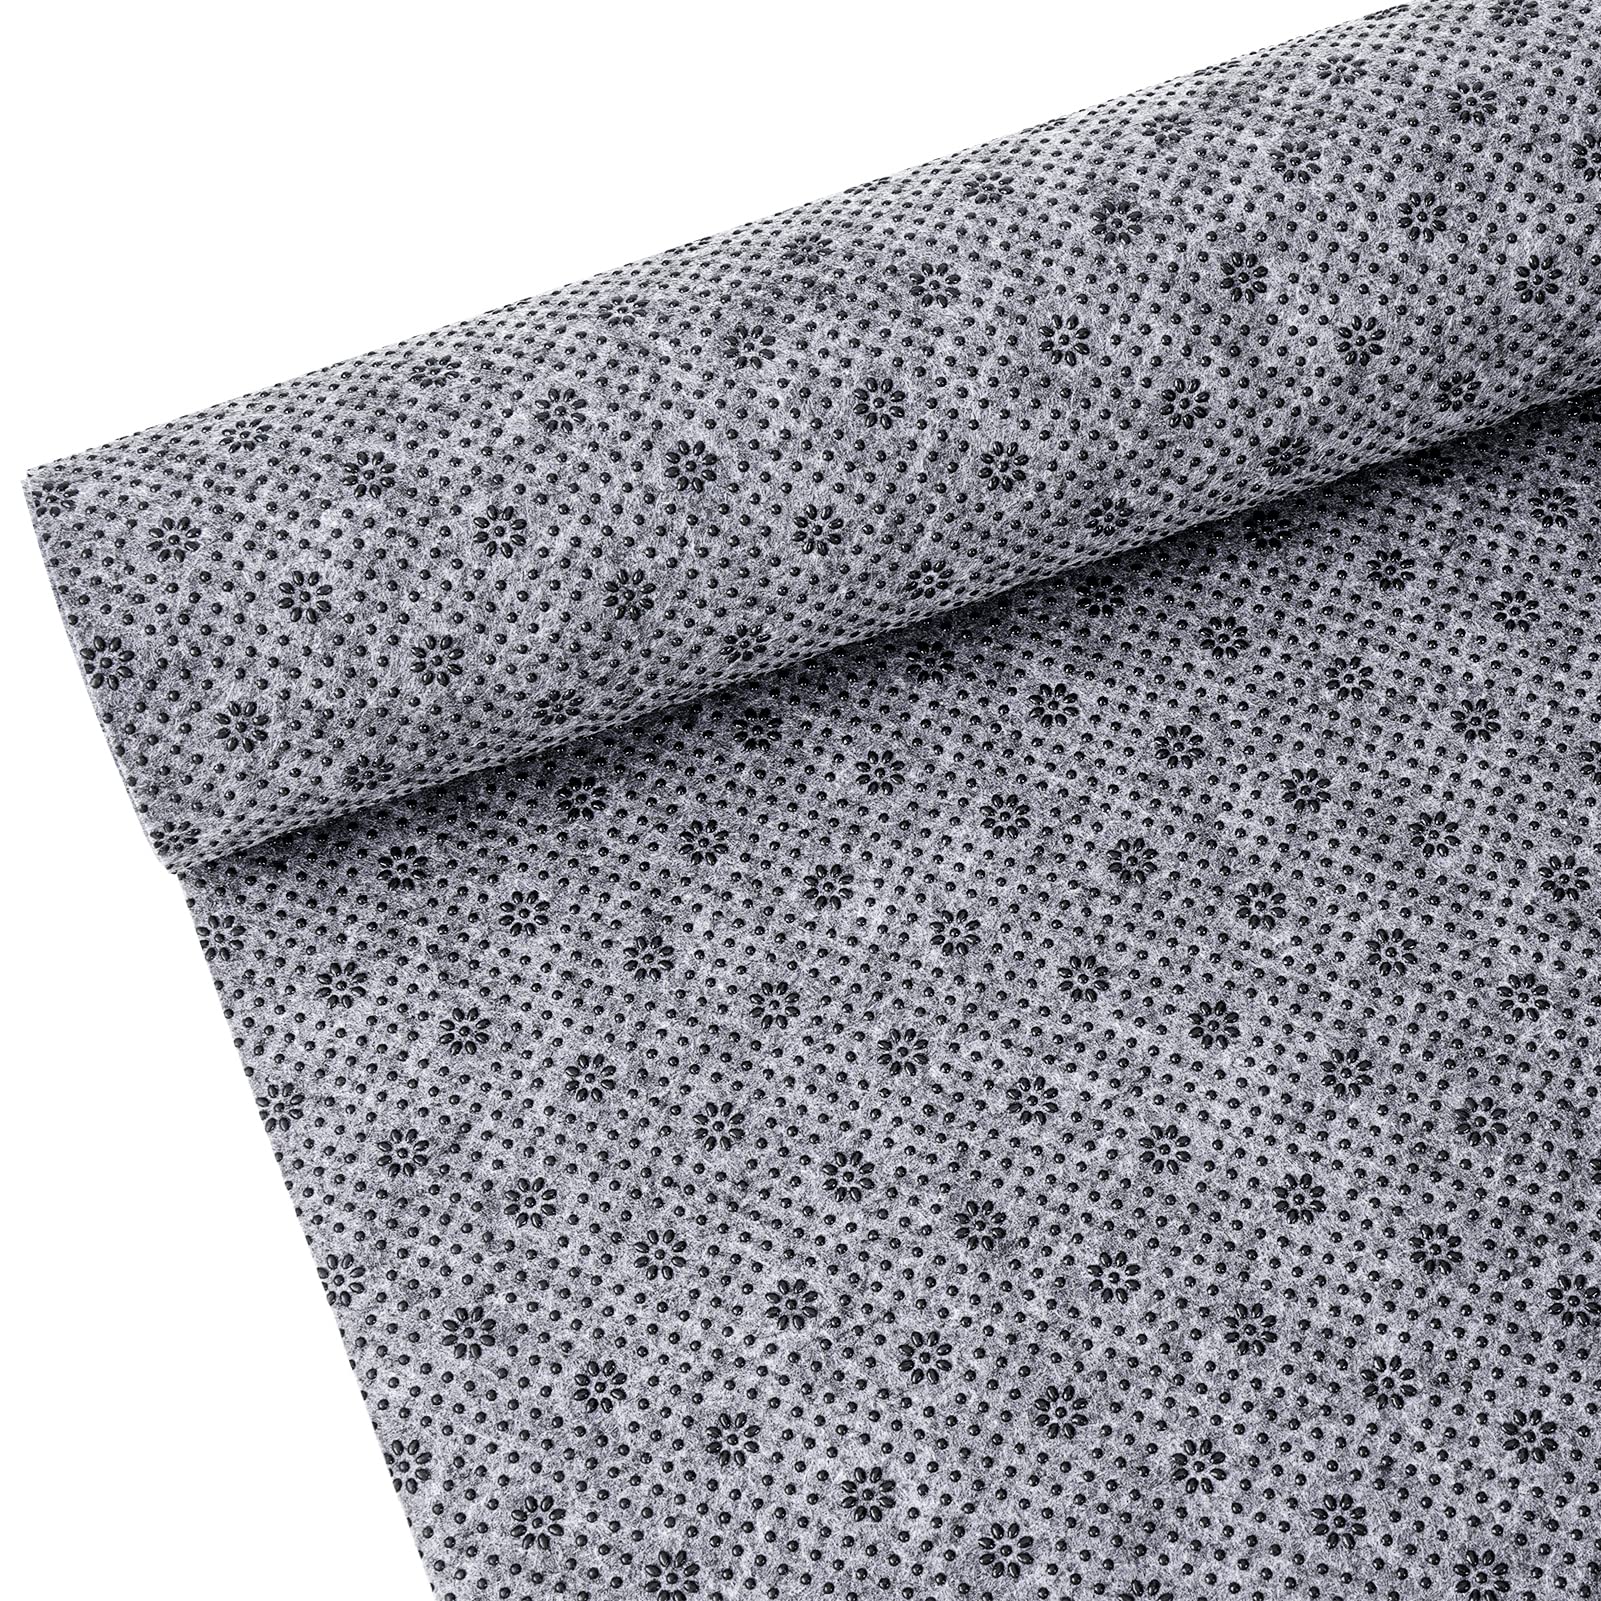 Backing Rug Fabric for Tufting with Grippy Non Slip Rubber Dots